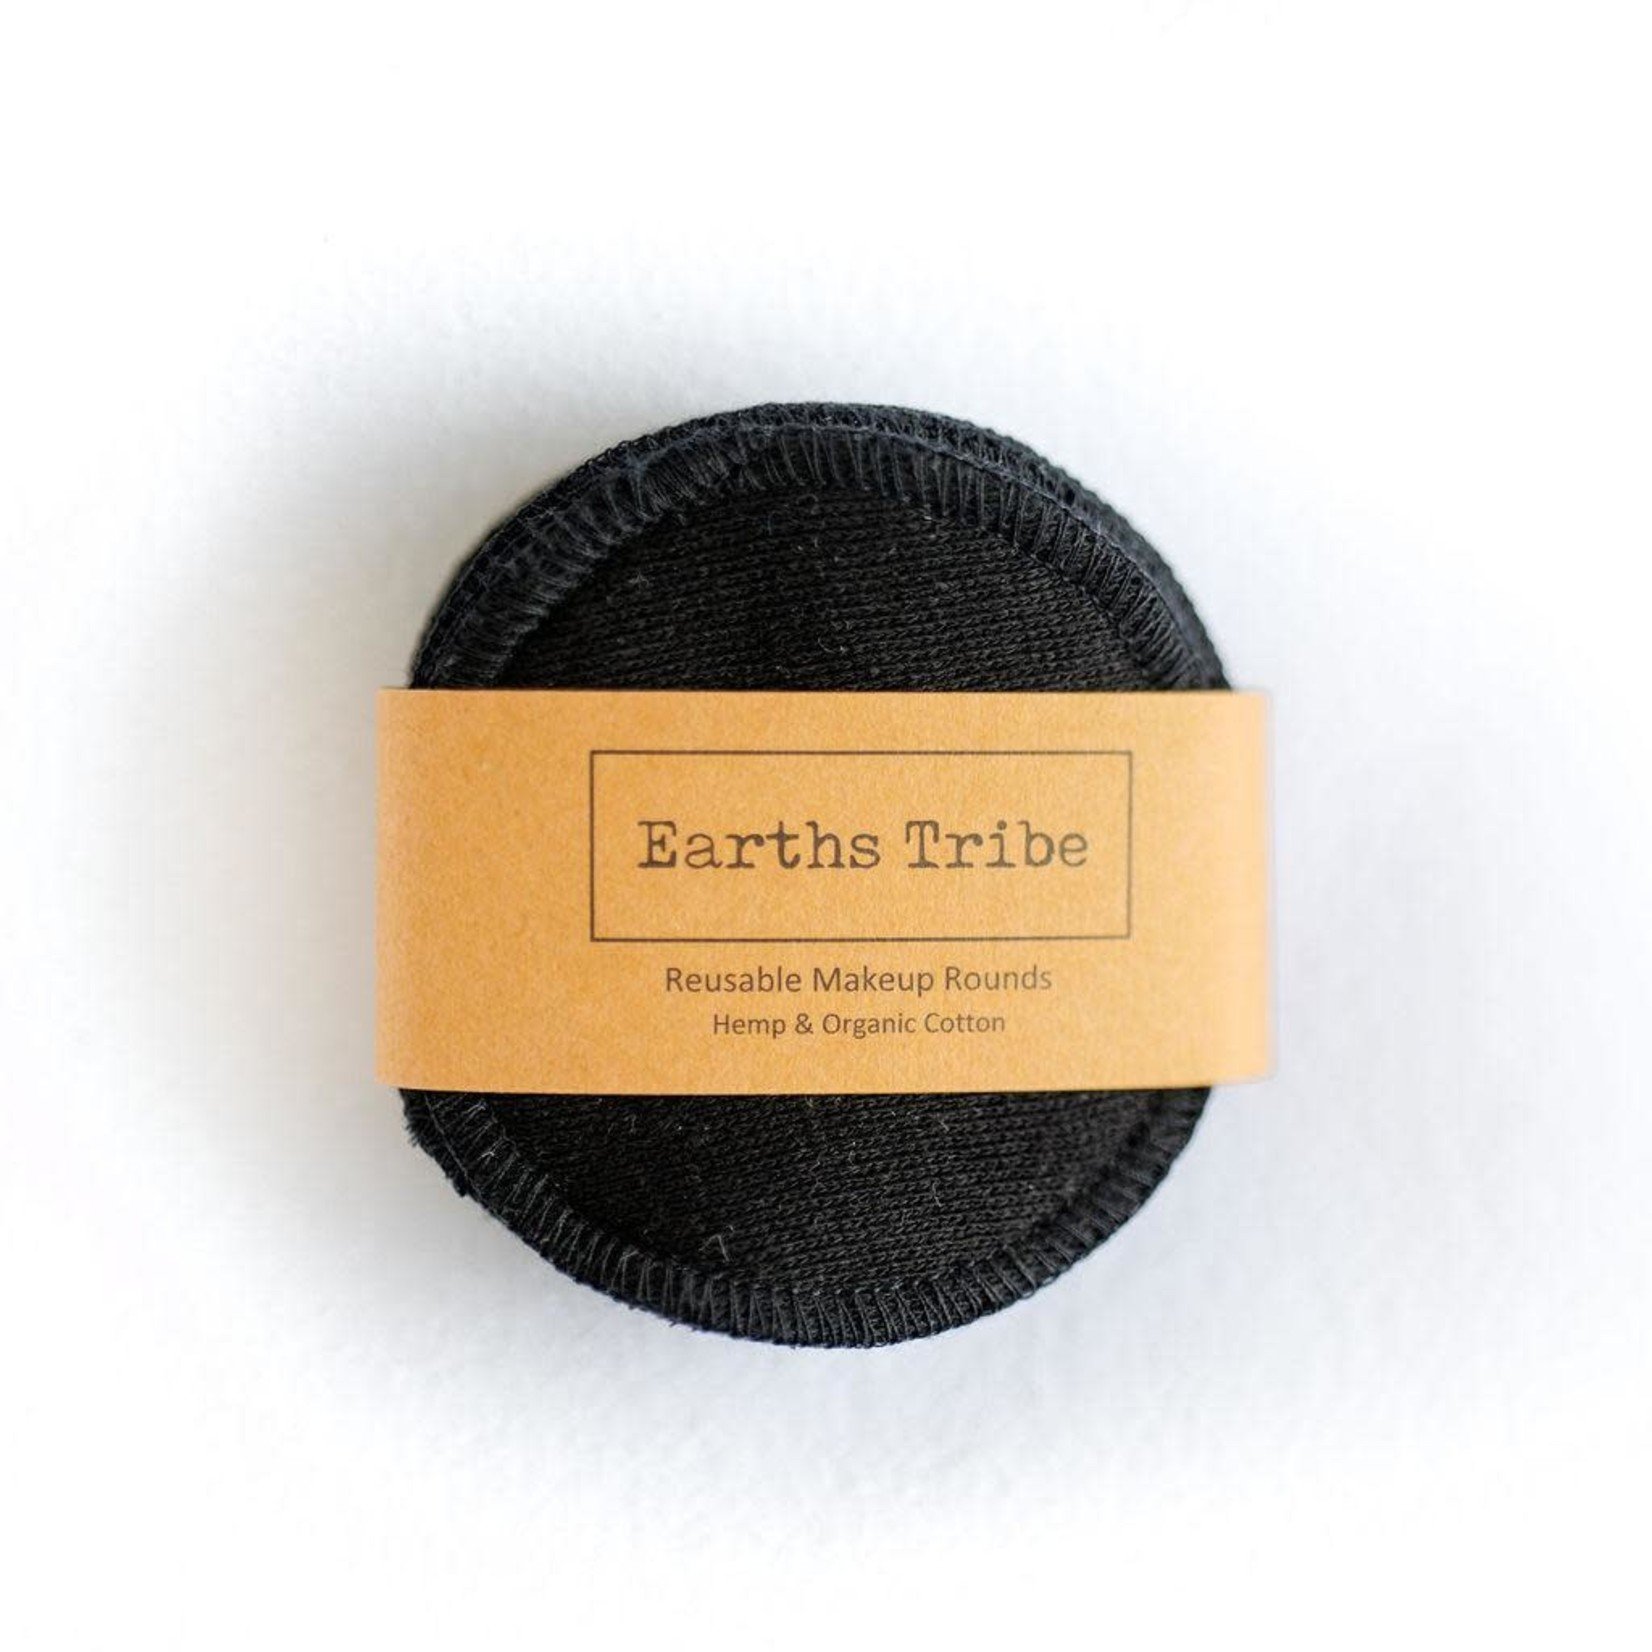 Earths Tribe Earths Tribe Reusable Makeup Rounds